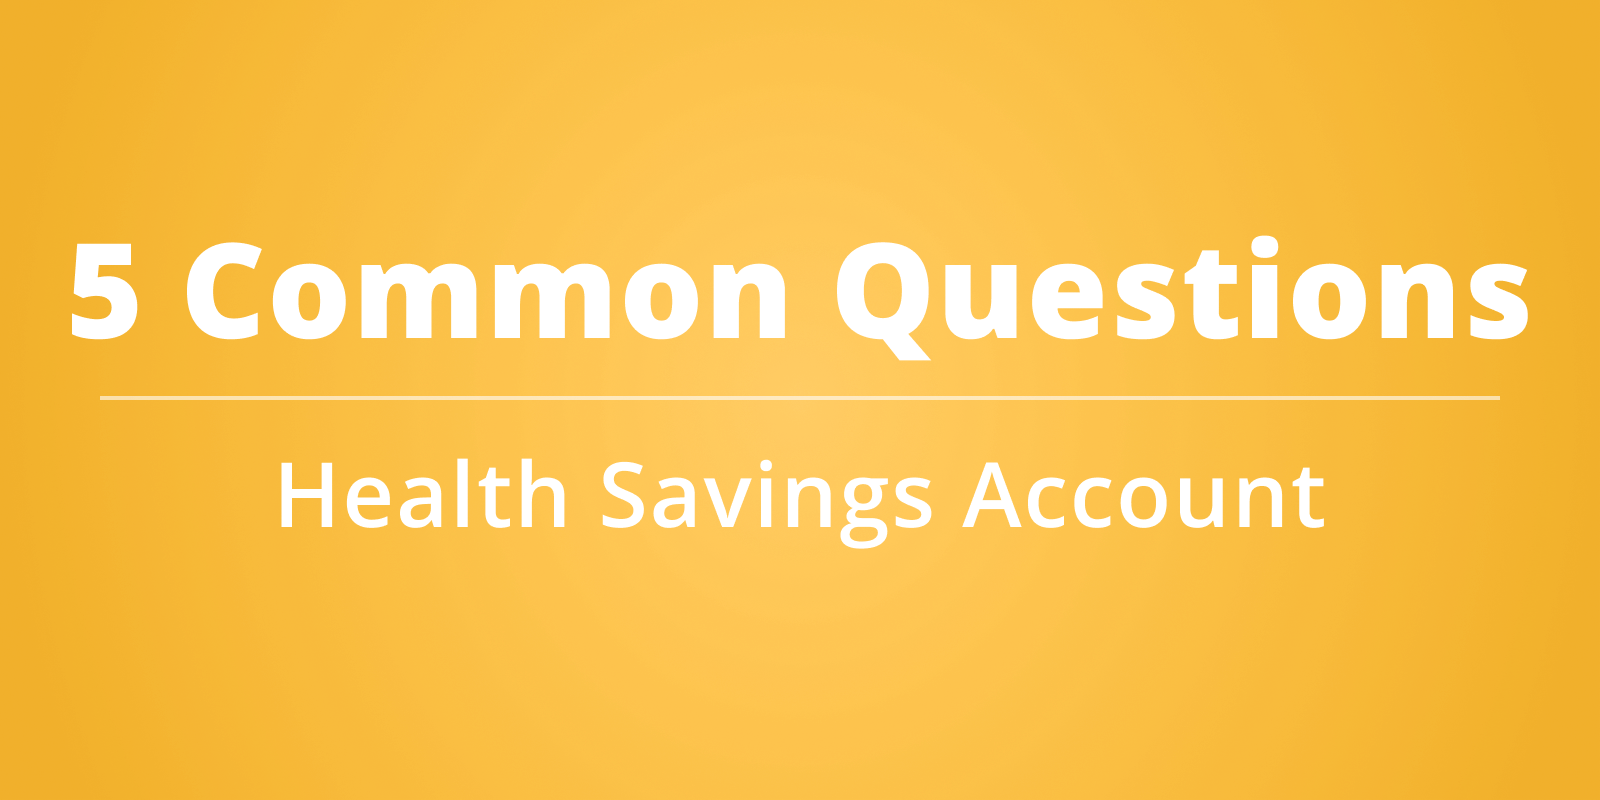 5 Common Health Savings Account Questions